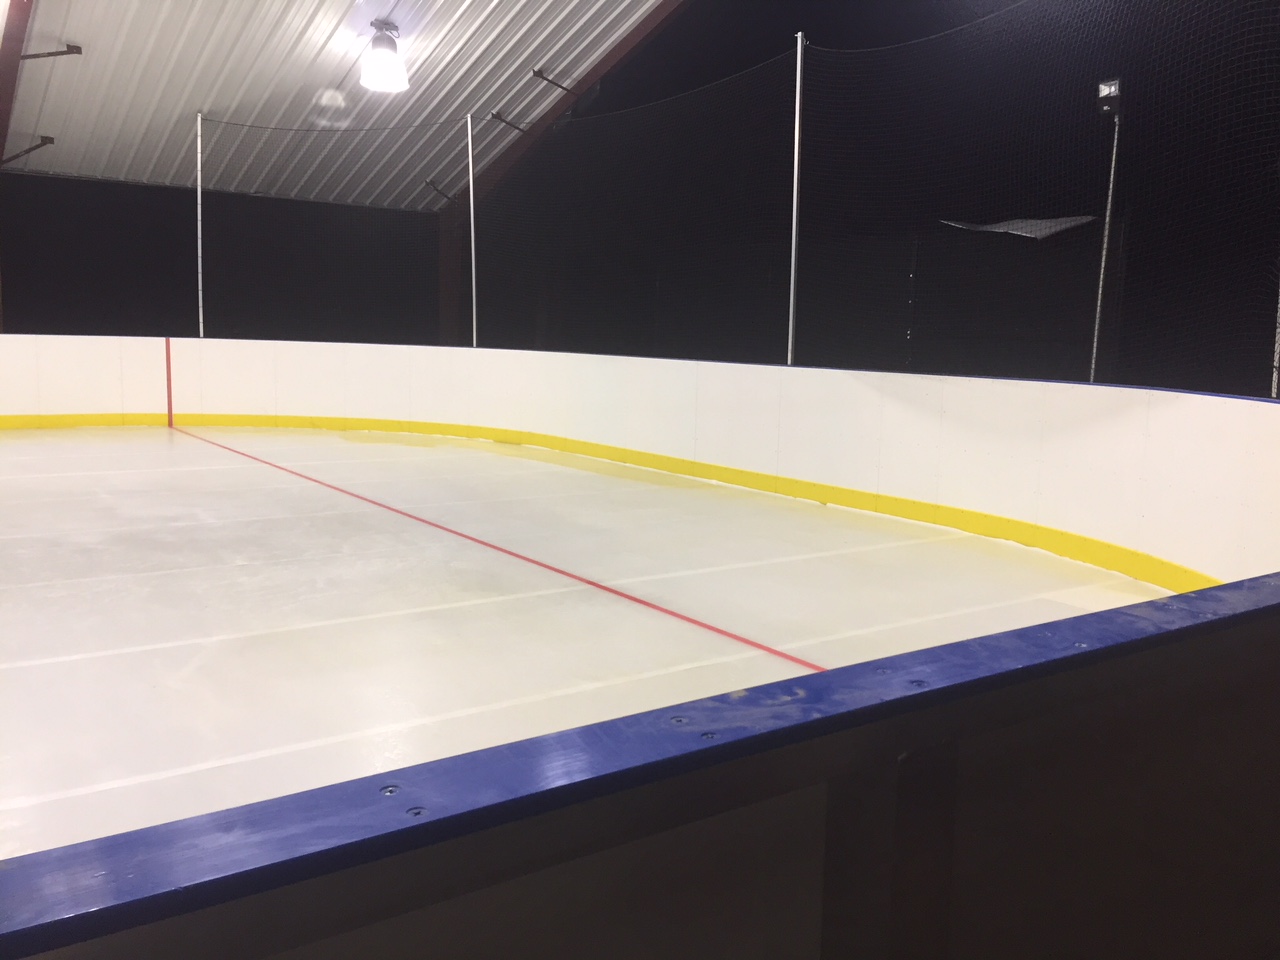 Permanent refrigerated rink